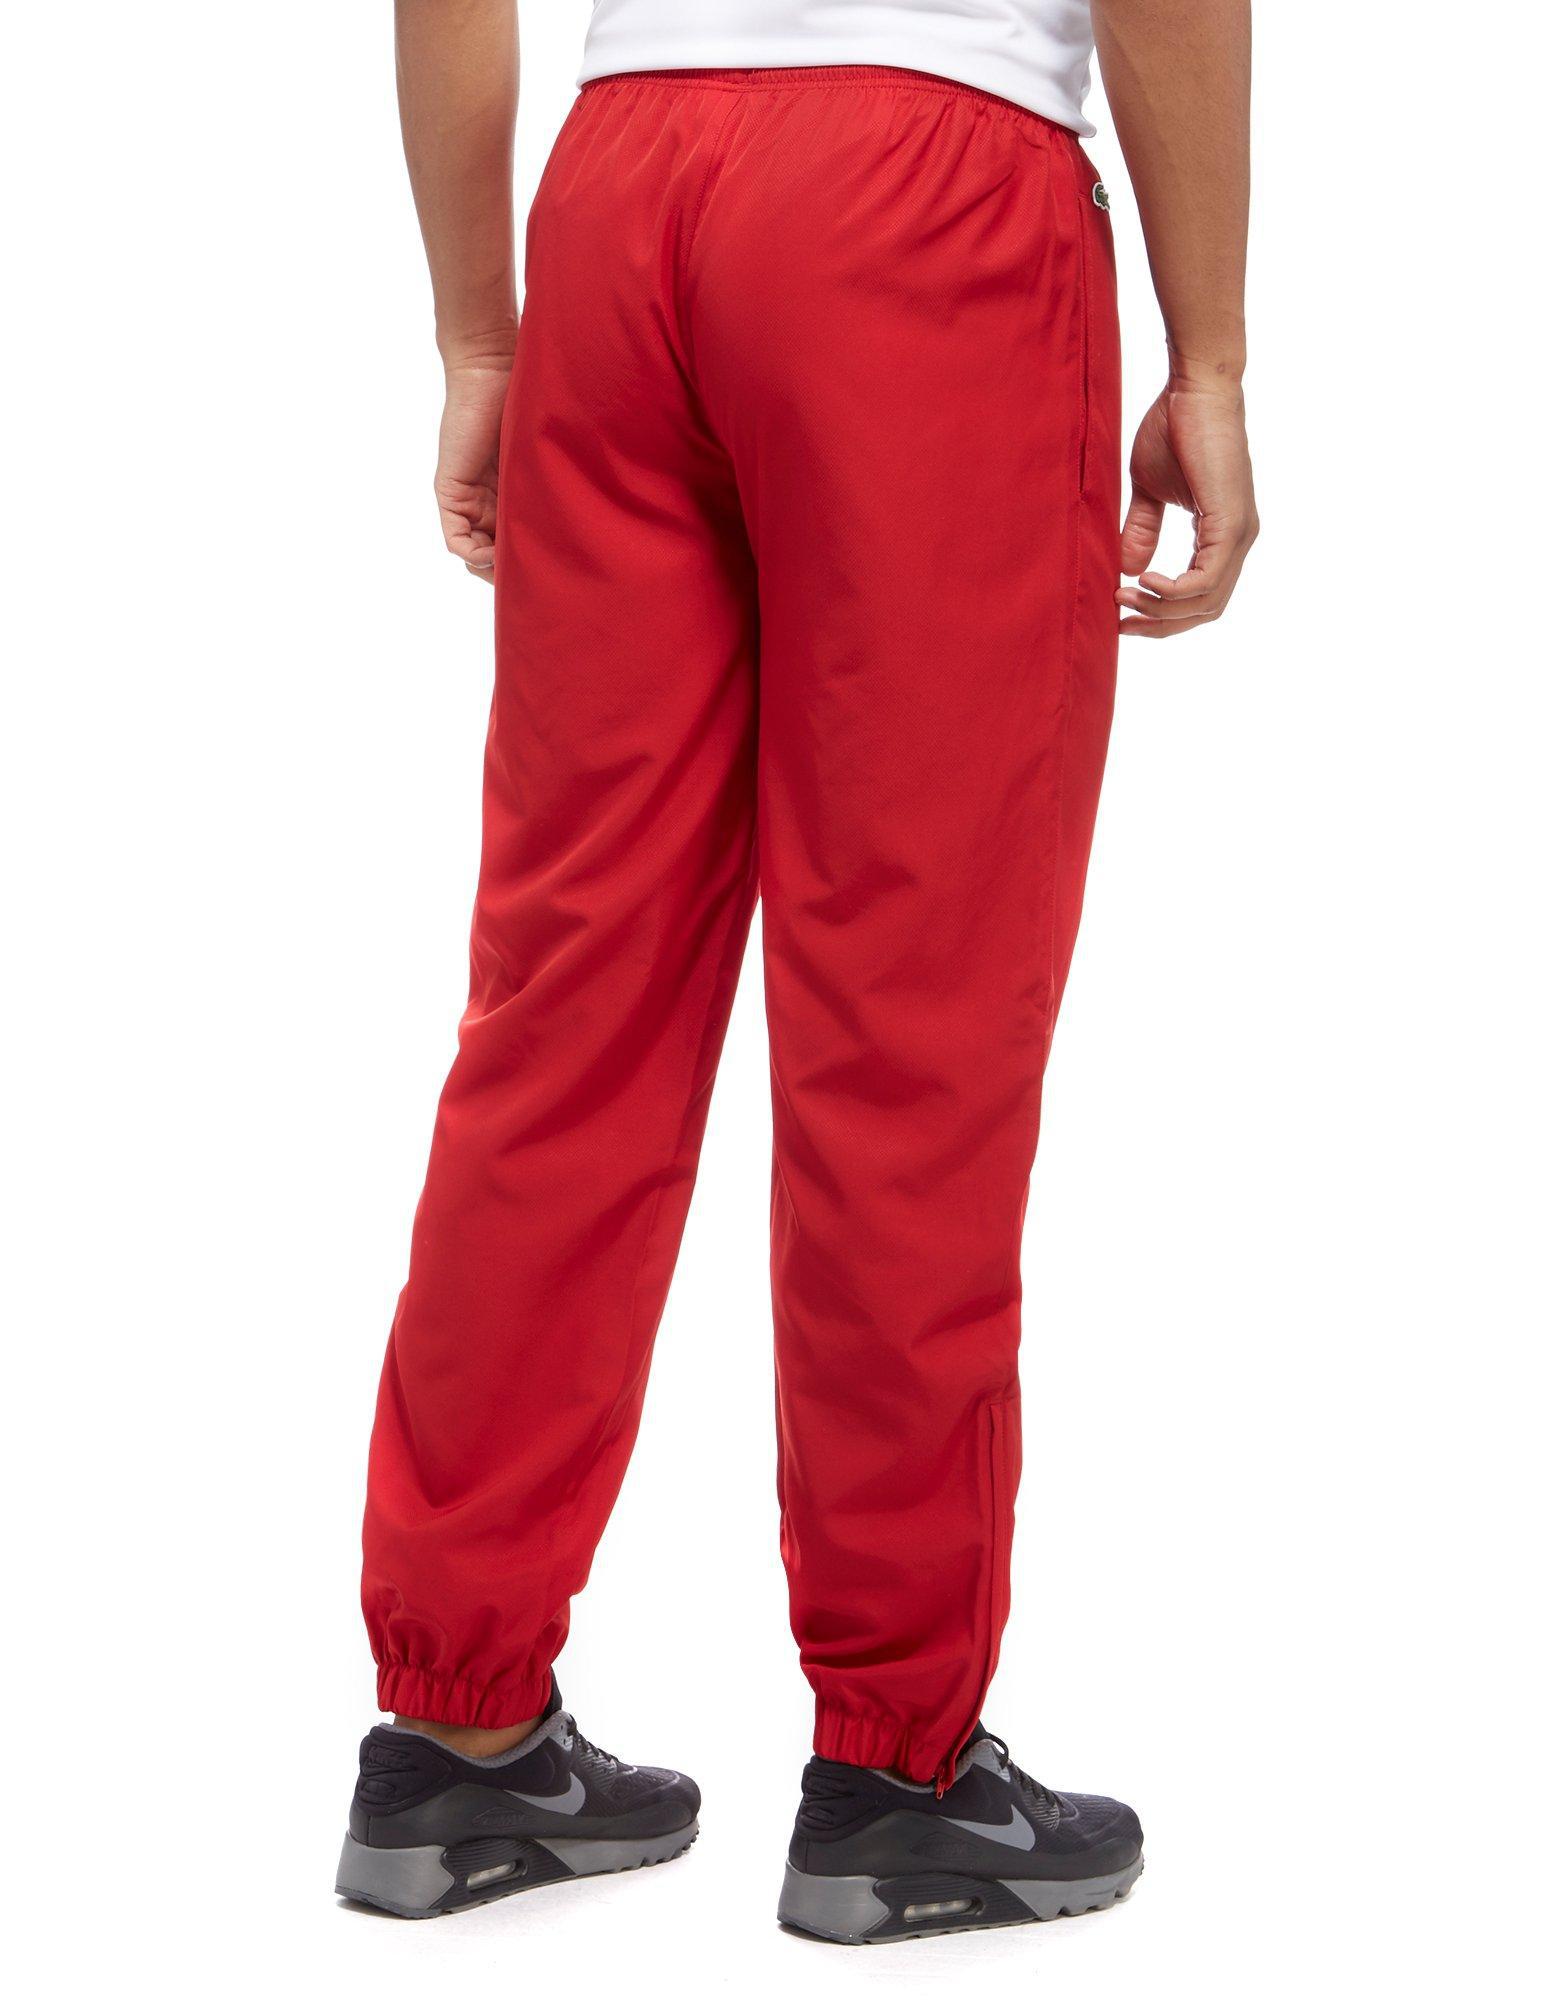 Lacoste Synthetic Guppy Track Pants in Red for Men - Lyst